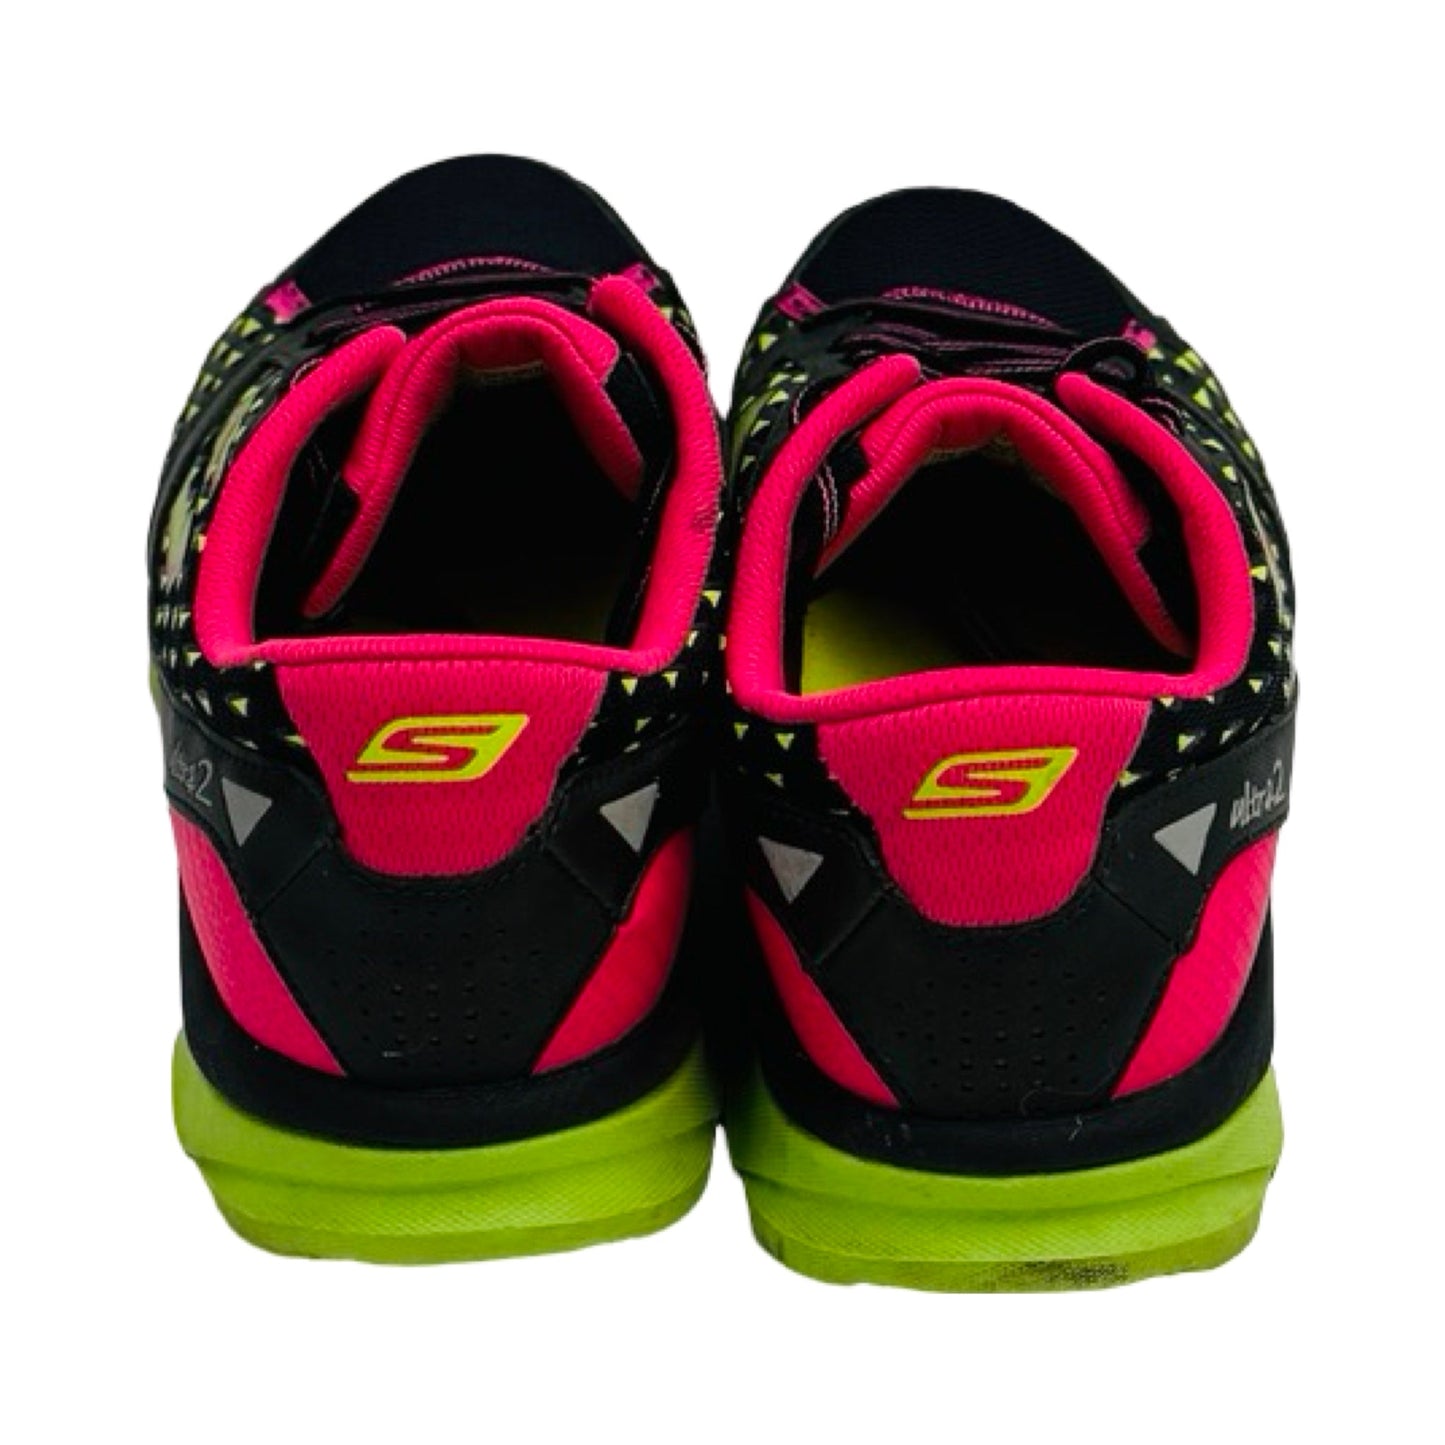 Green & Pink Shoes Athletic By Skechers  Size: 9.5